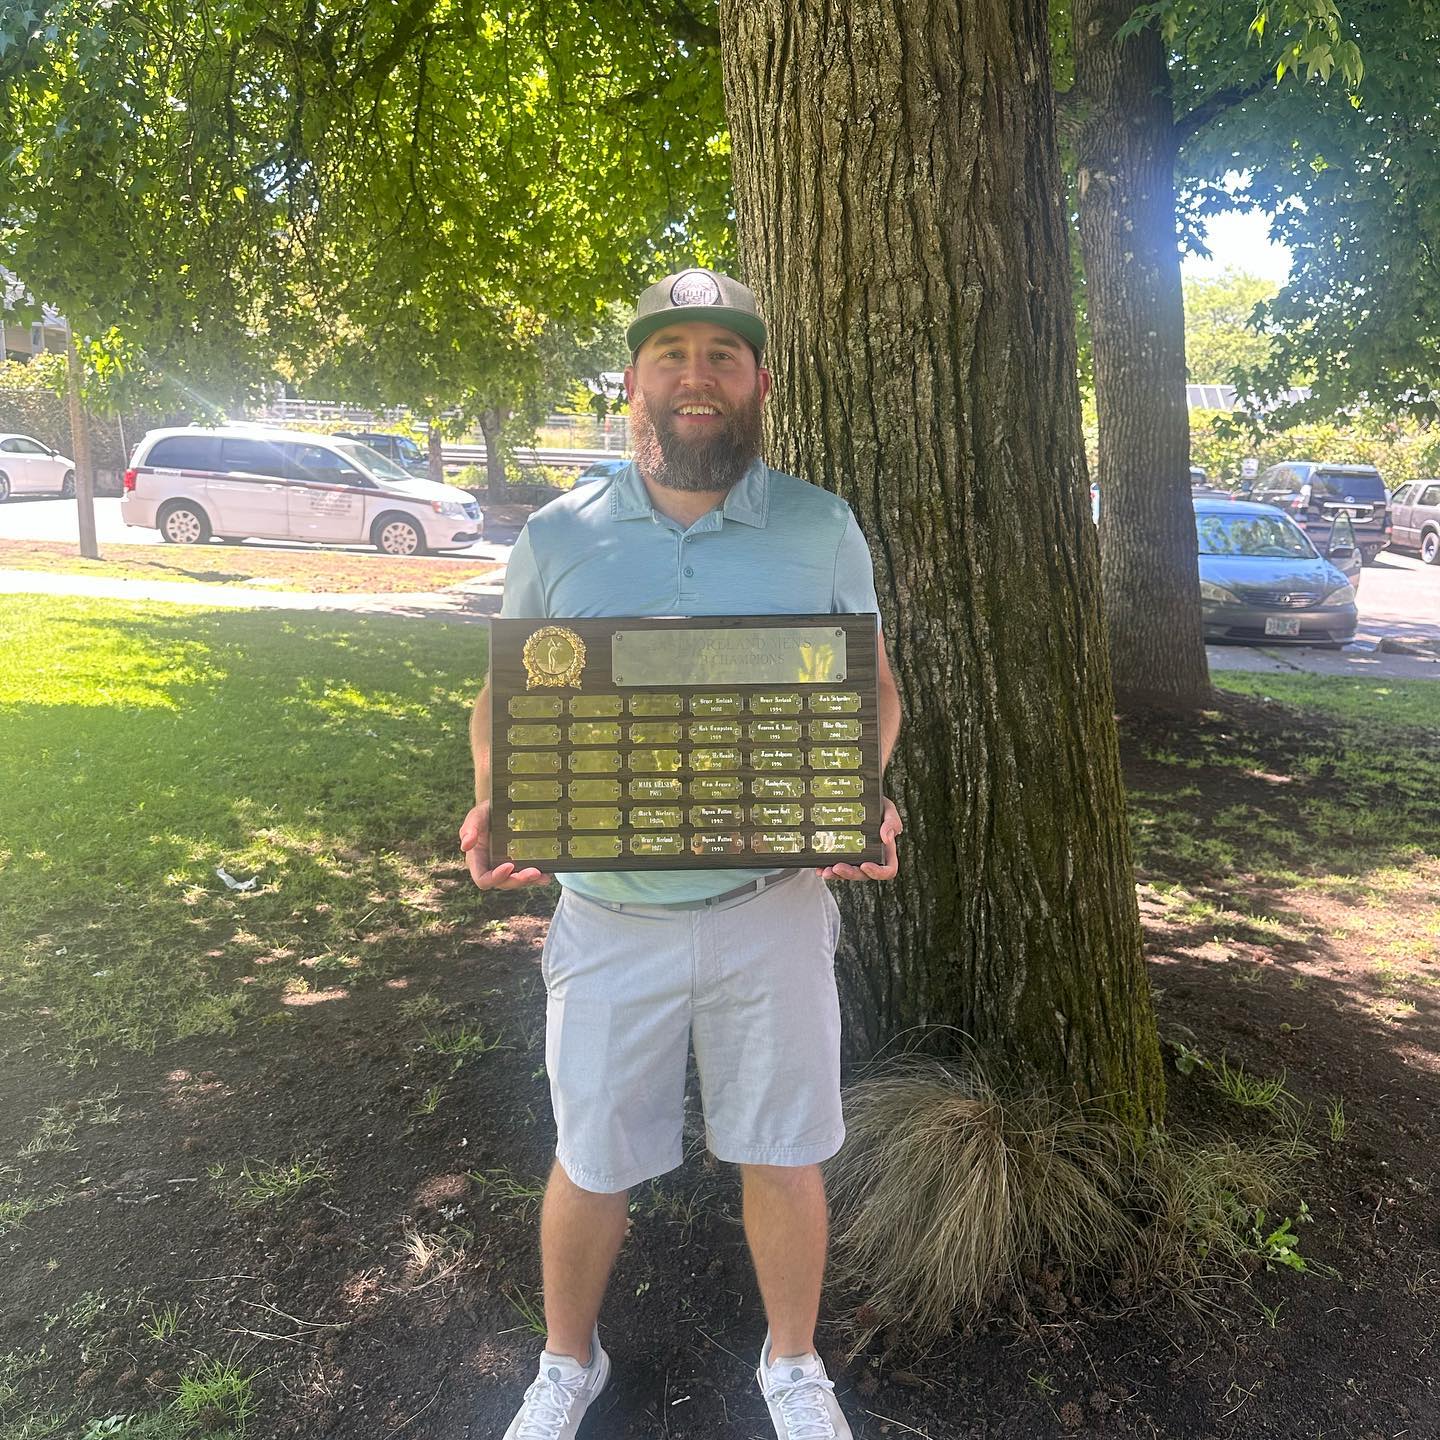 Me, holding the plaque of past winners of the club championship at Eastmoreland